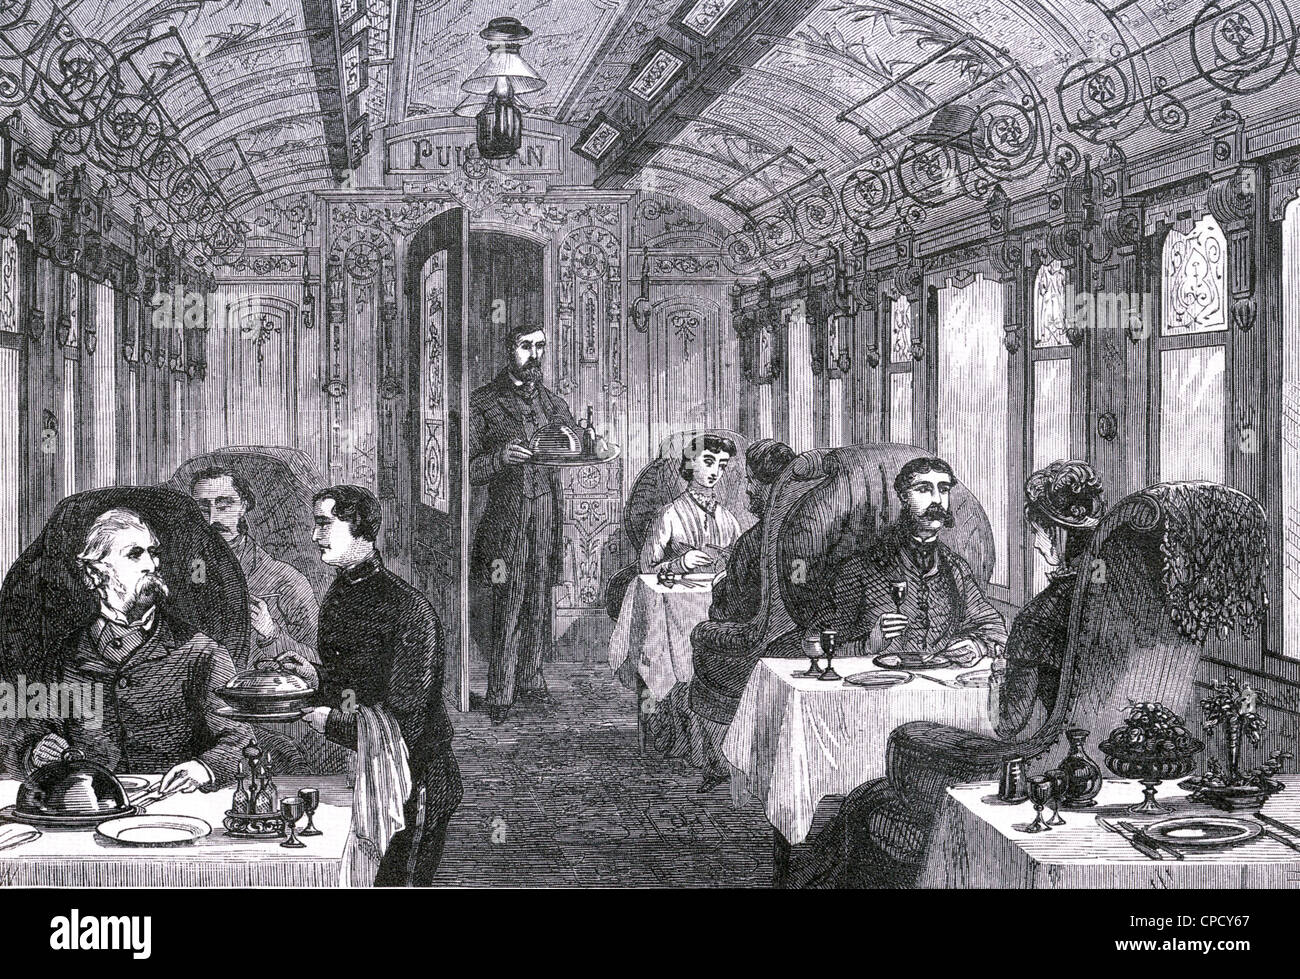 PULLMAN DINING CAR on the Great Northern Railway in November 1879 Stock Photo